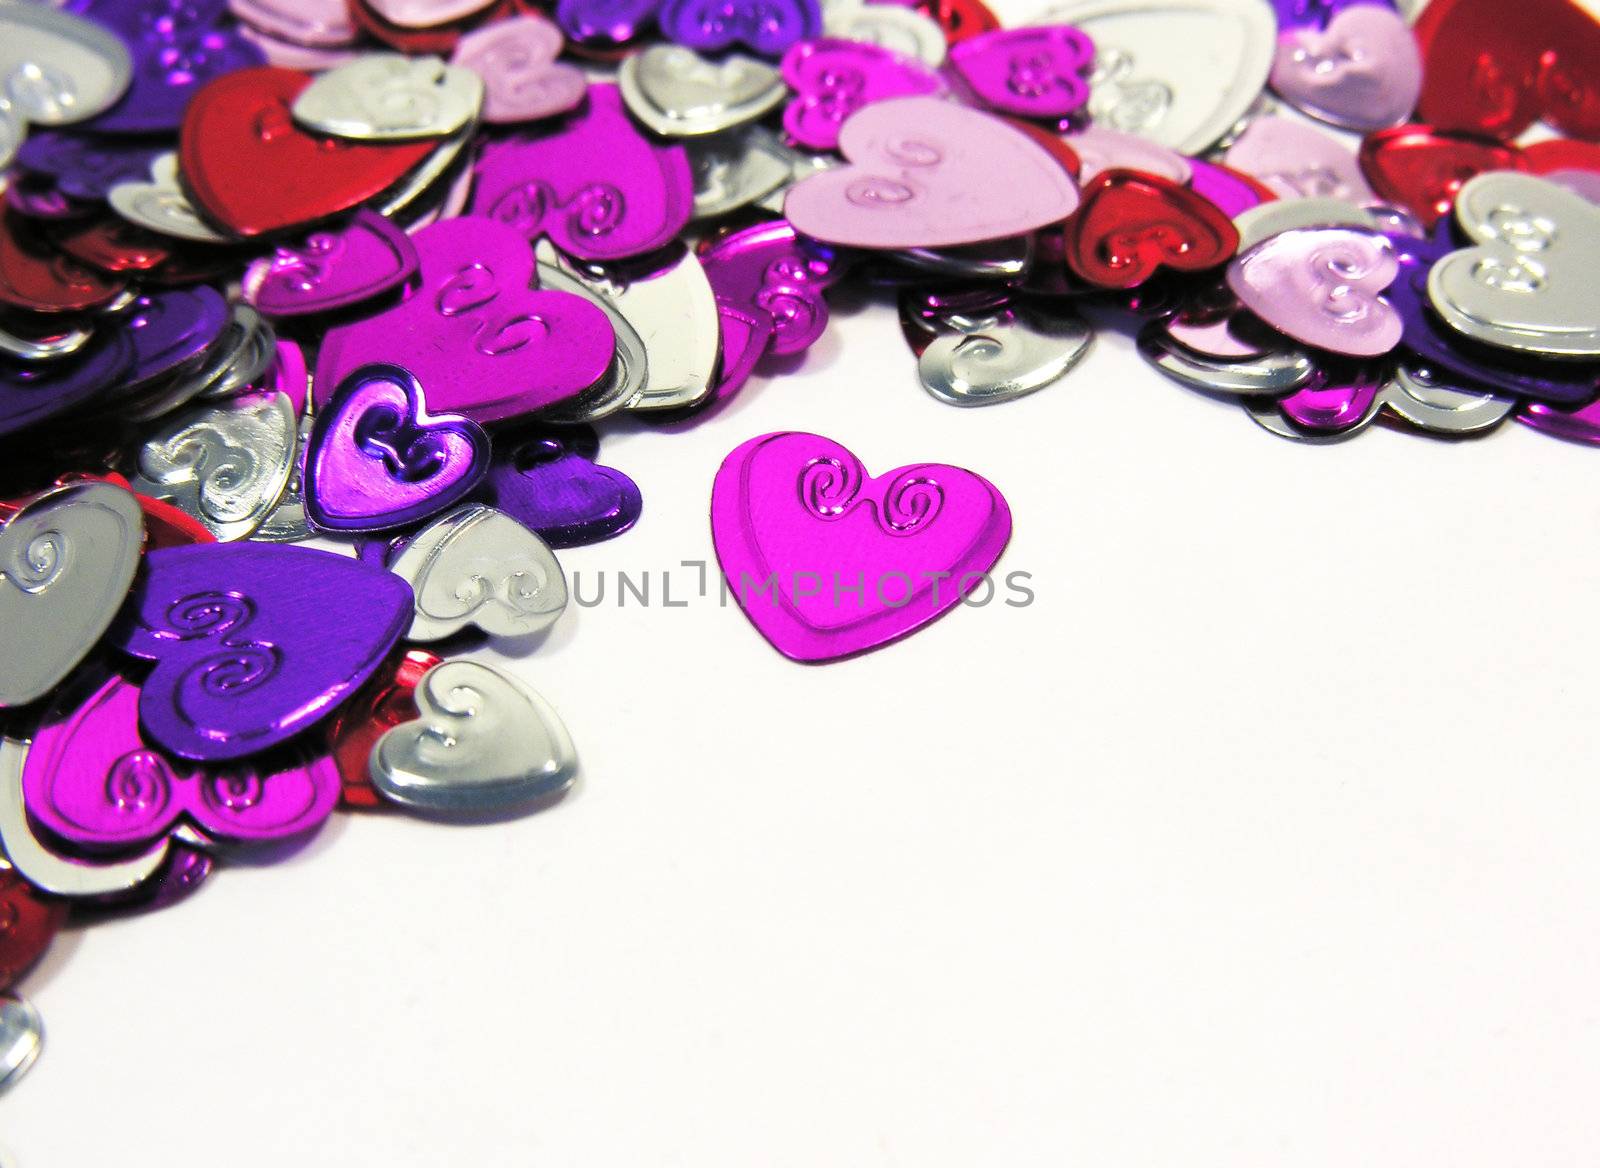 decorative hearts laying on white background